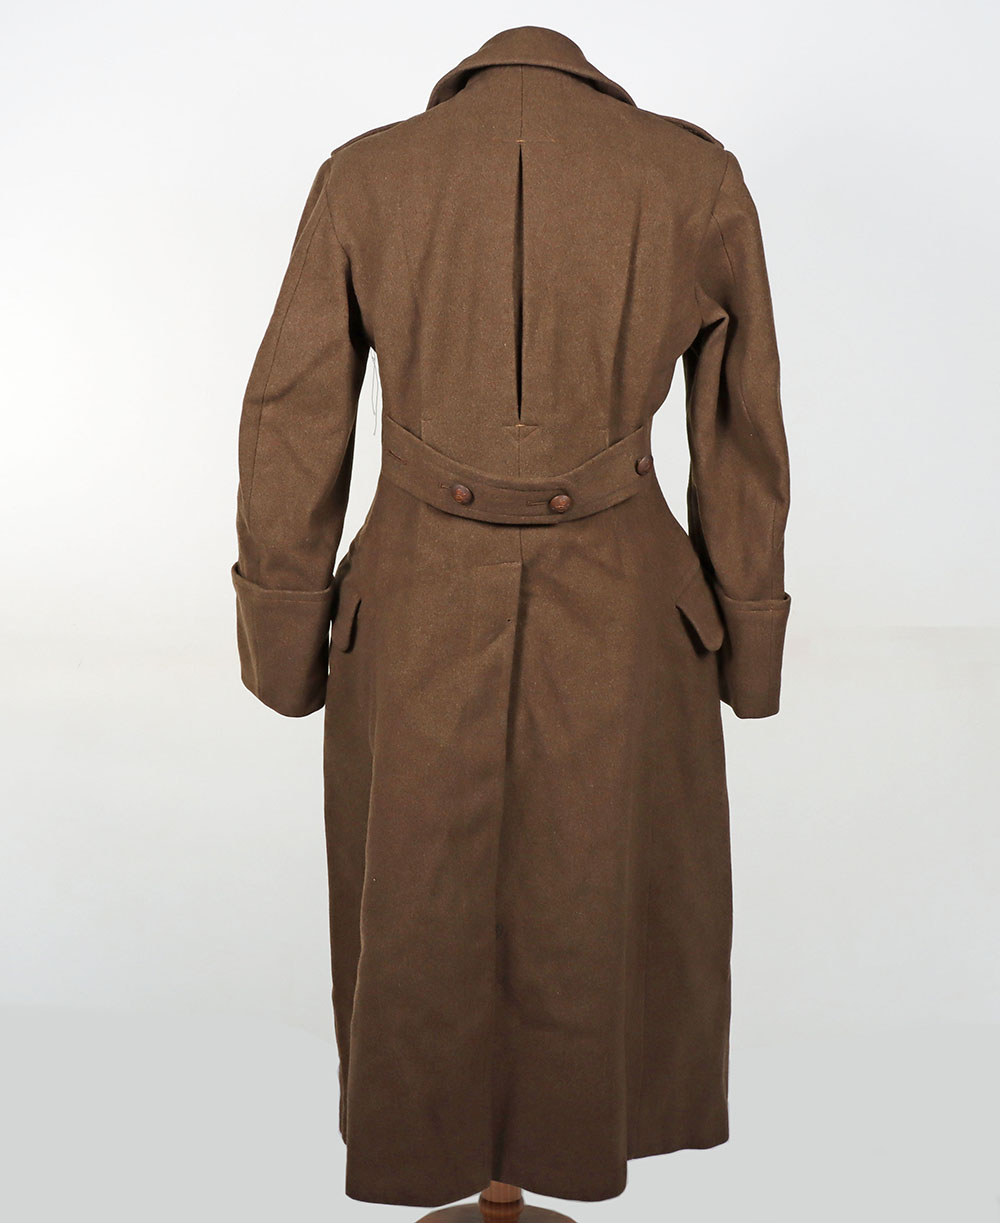 WW2 RA Officers Great Coat - Image 4 of 13